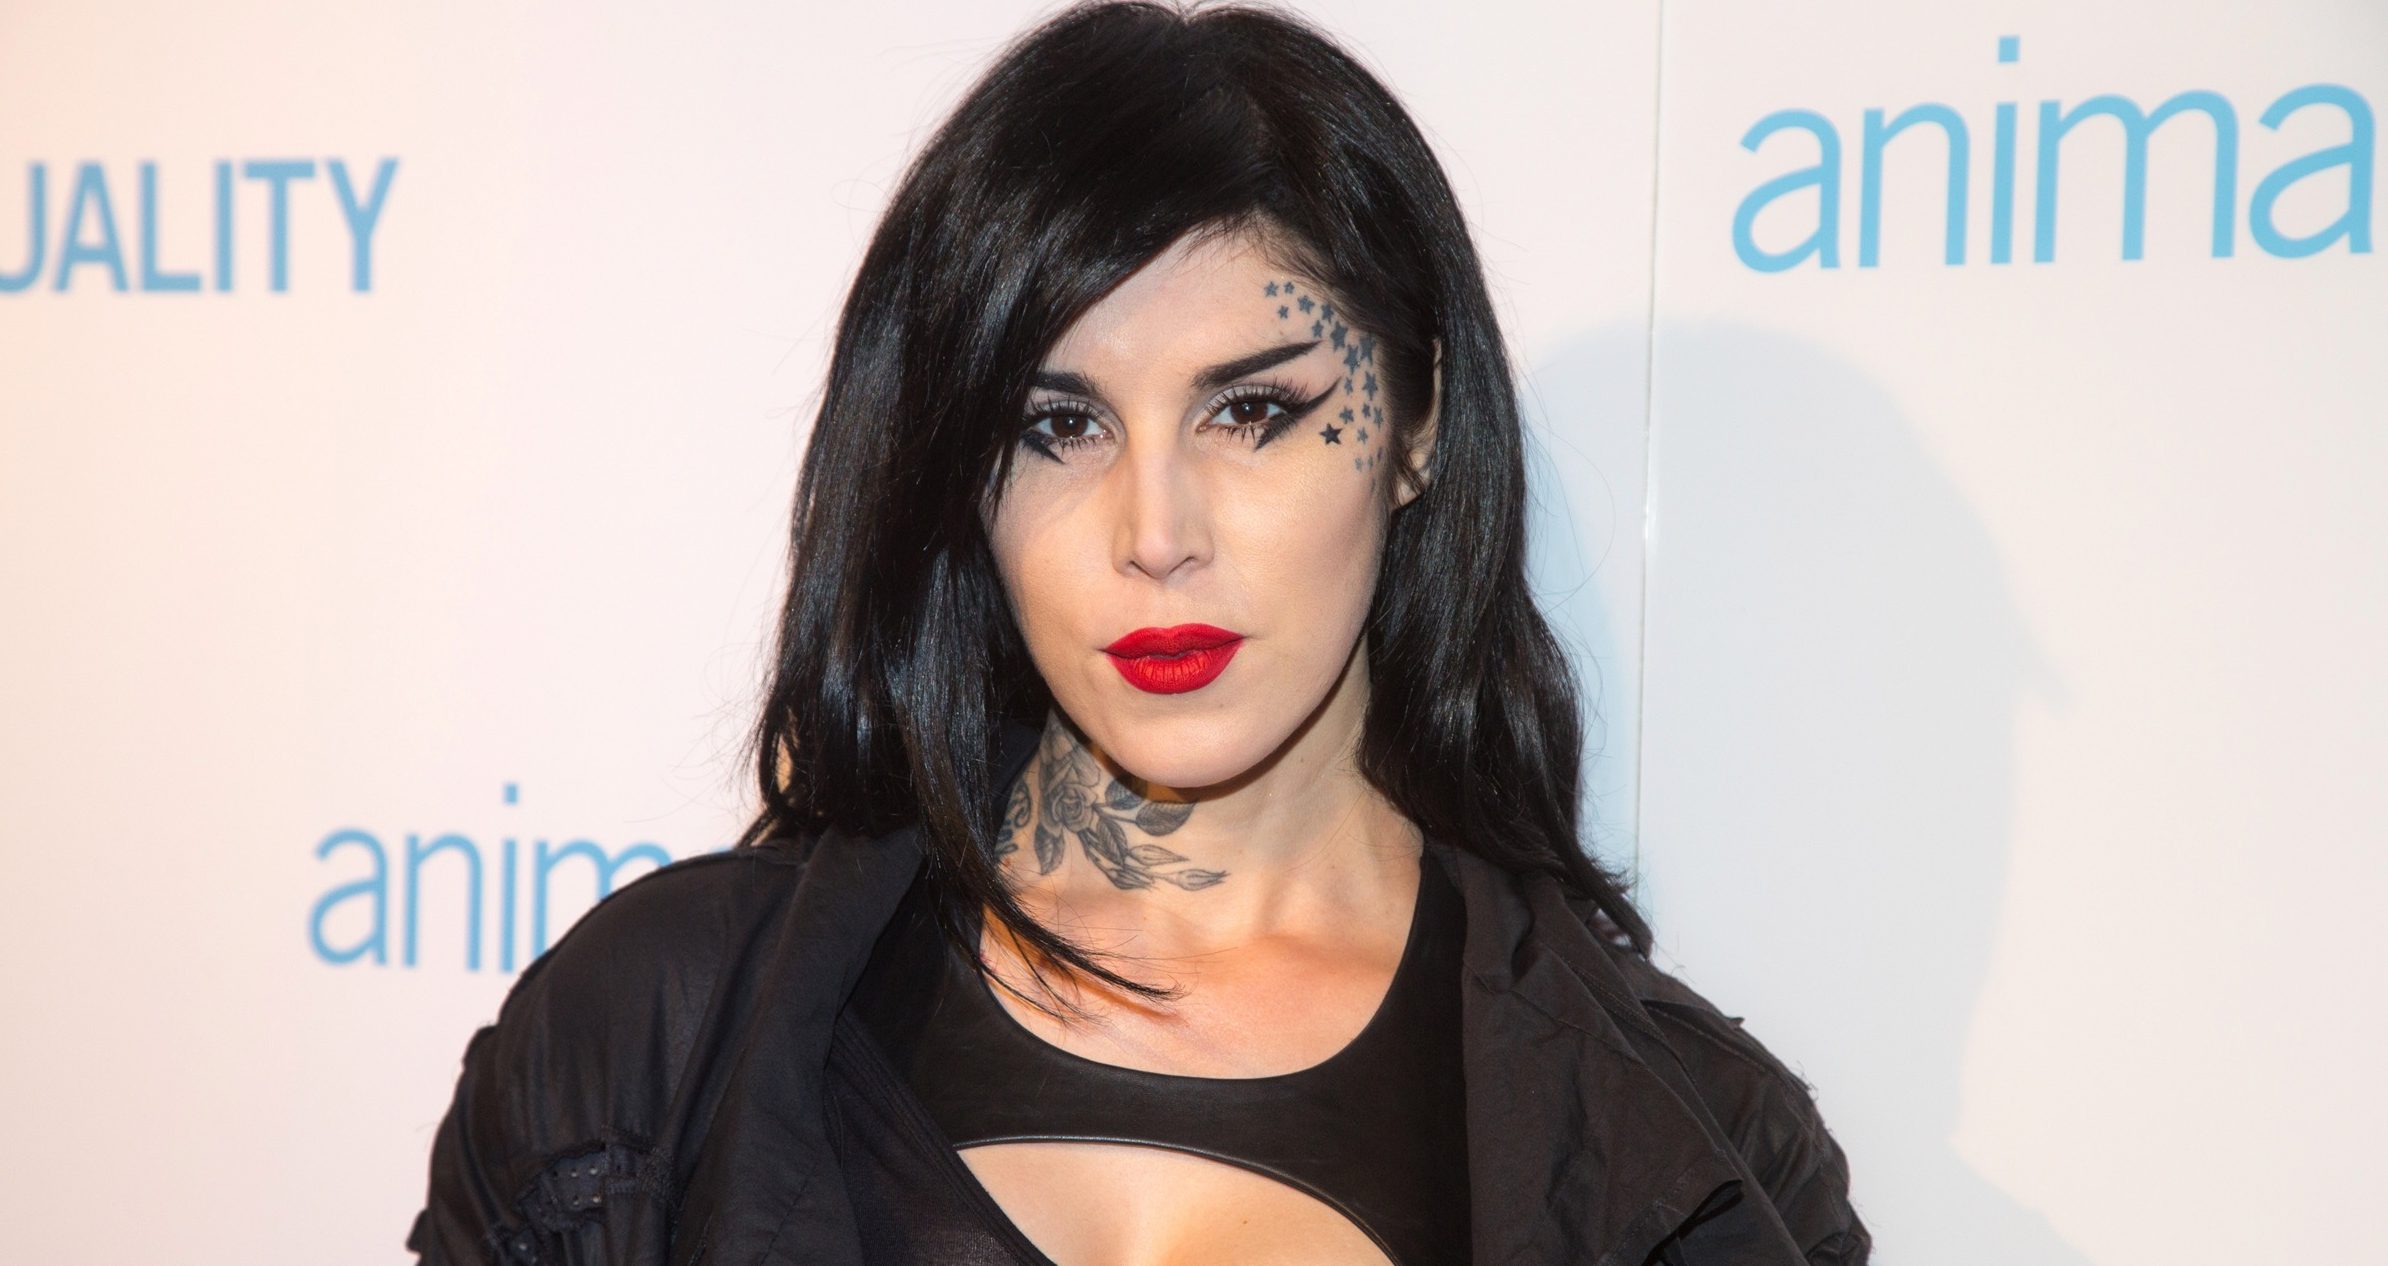 Kat Von D arrives to the Animal Equality Global Action Annual Gala at The Beverly Hilton Hotel on December 2, 2017 in Beverly Hills, California.  (Photo by Gabriel Olsen/FilmMagic)